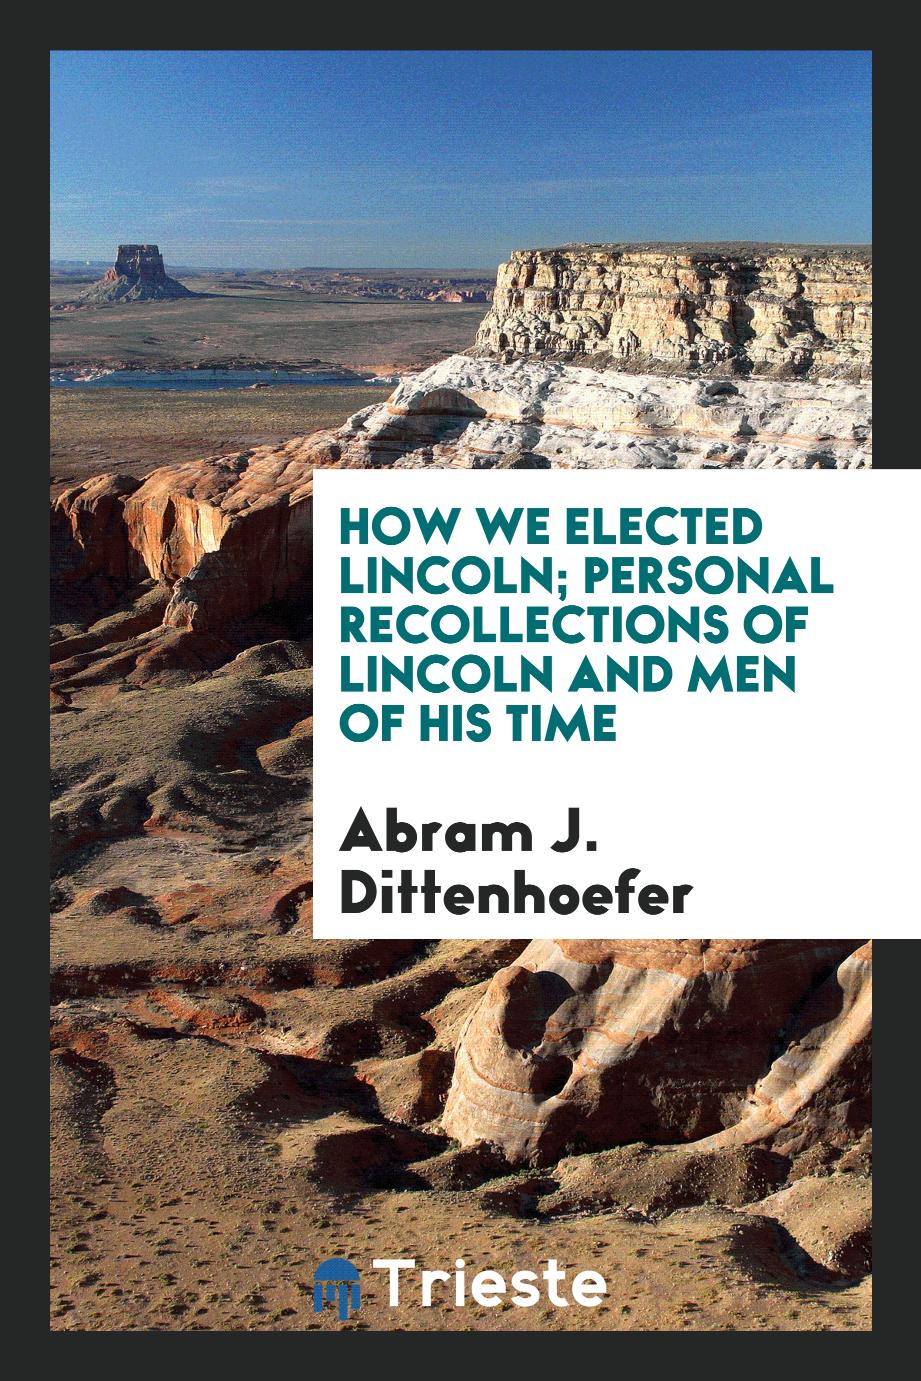 How we elected Lincoln; personal recollections of Lincoln and men of his time